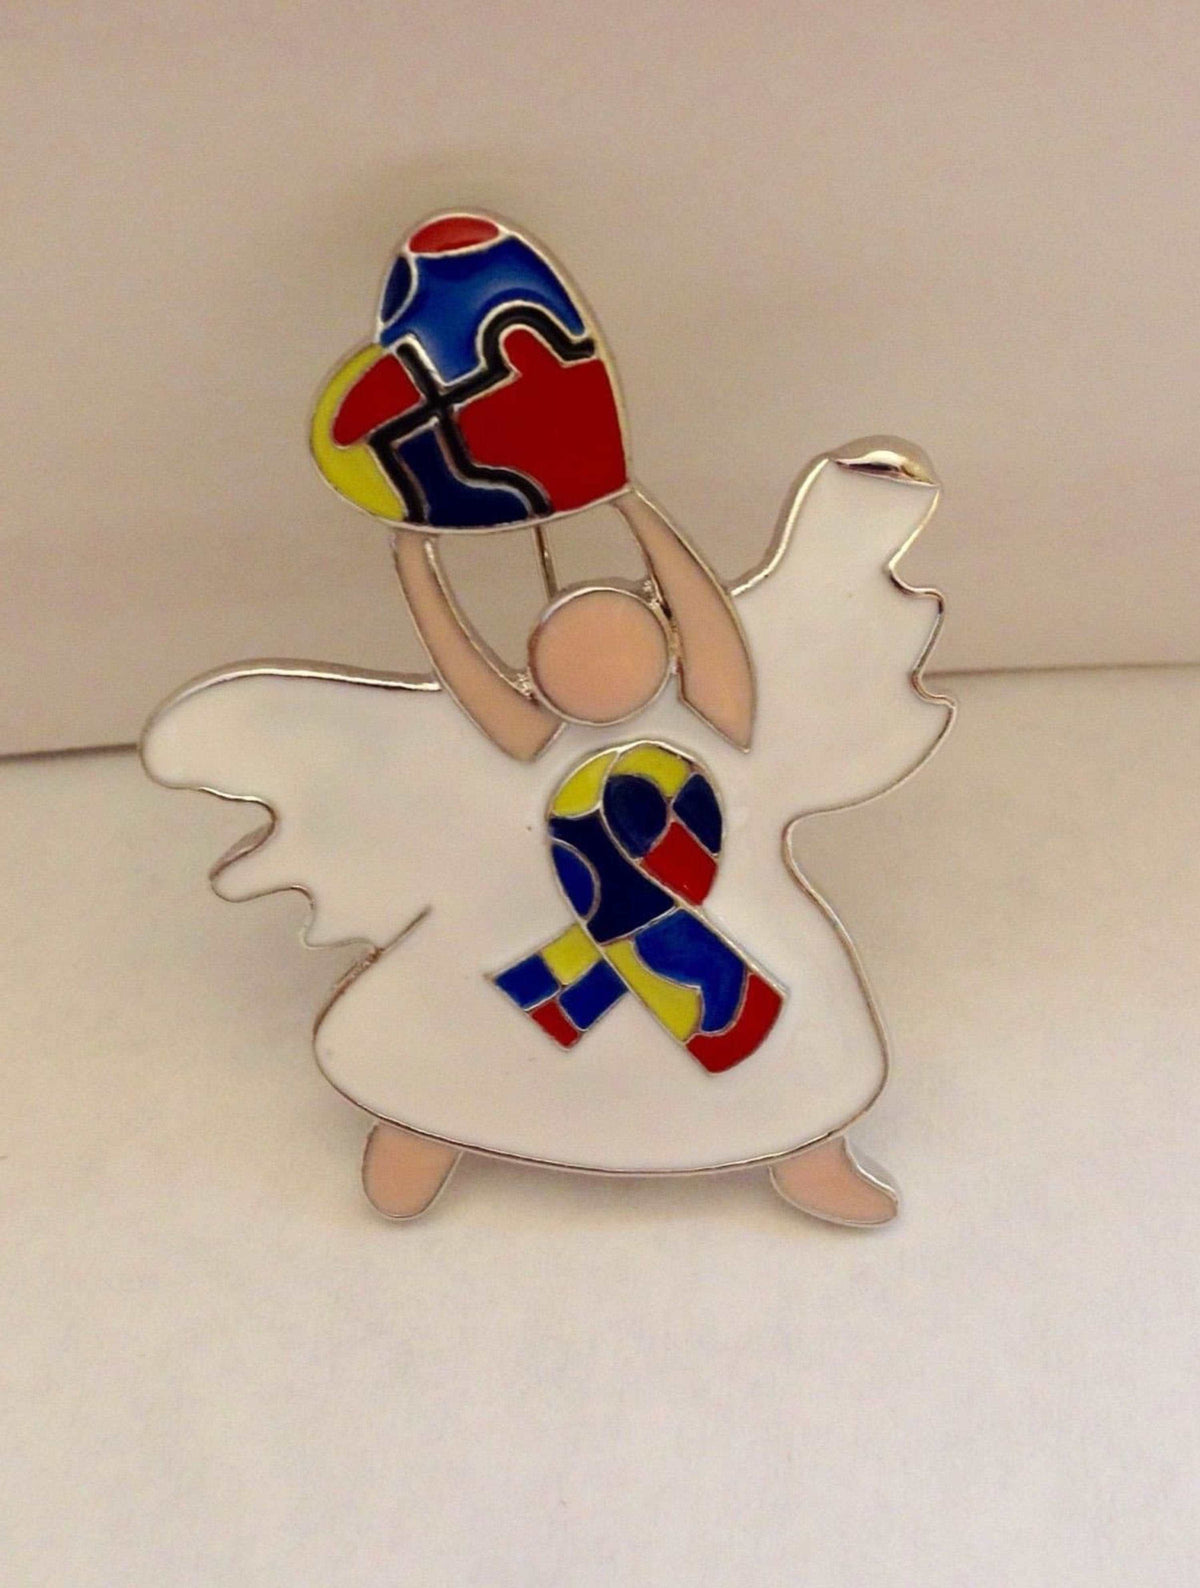 Autism Awareness Angel with a White dress and Heart - The House of Awareness